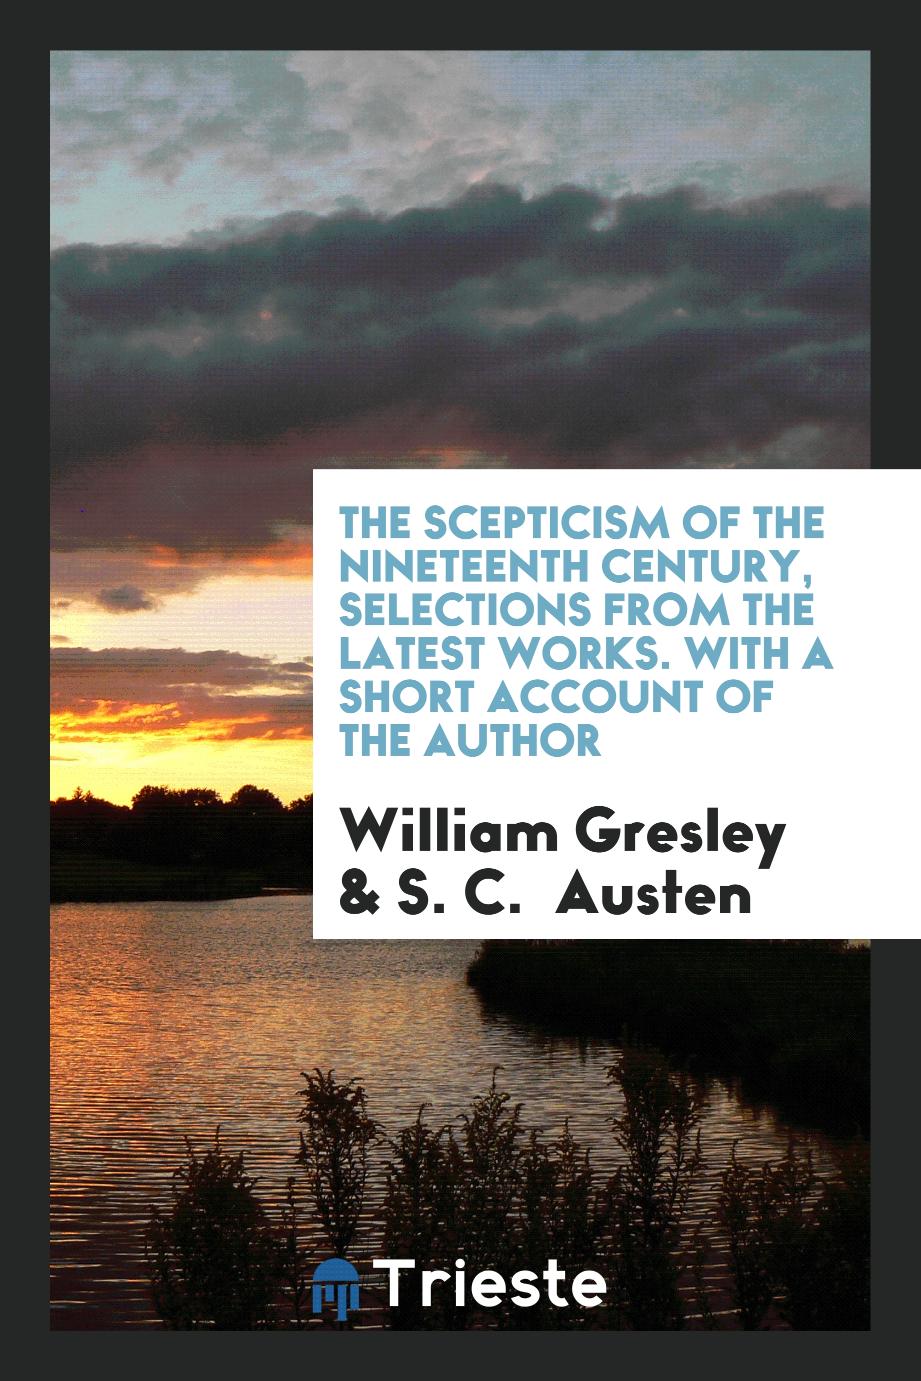 The Scepticism of the Nineteenth Century, Selections from the Latest Works. With a Short Account of the Author